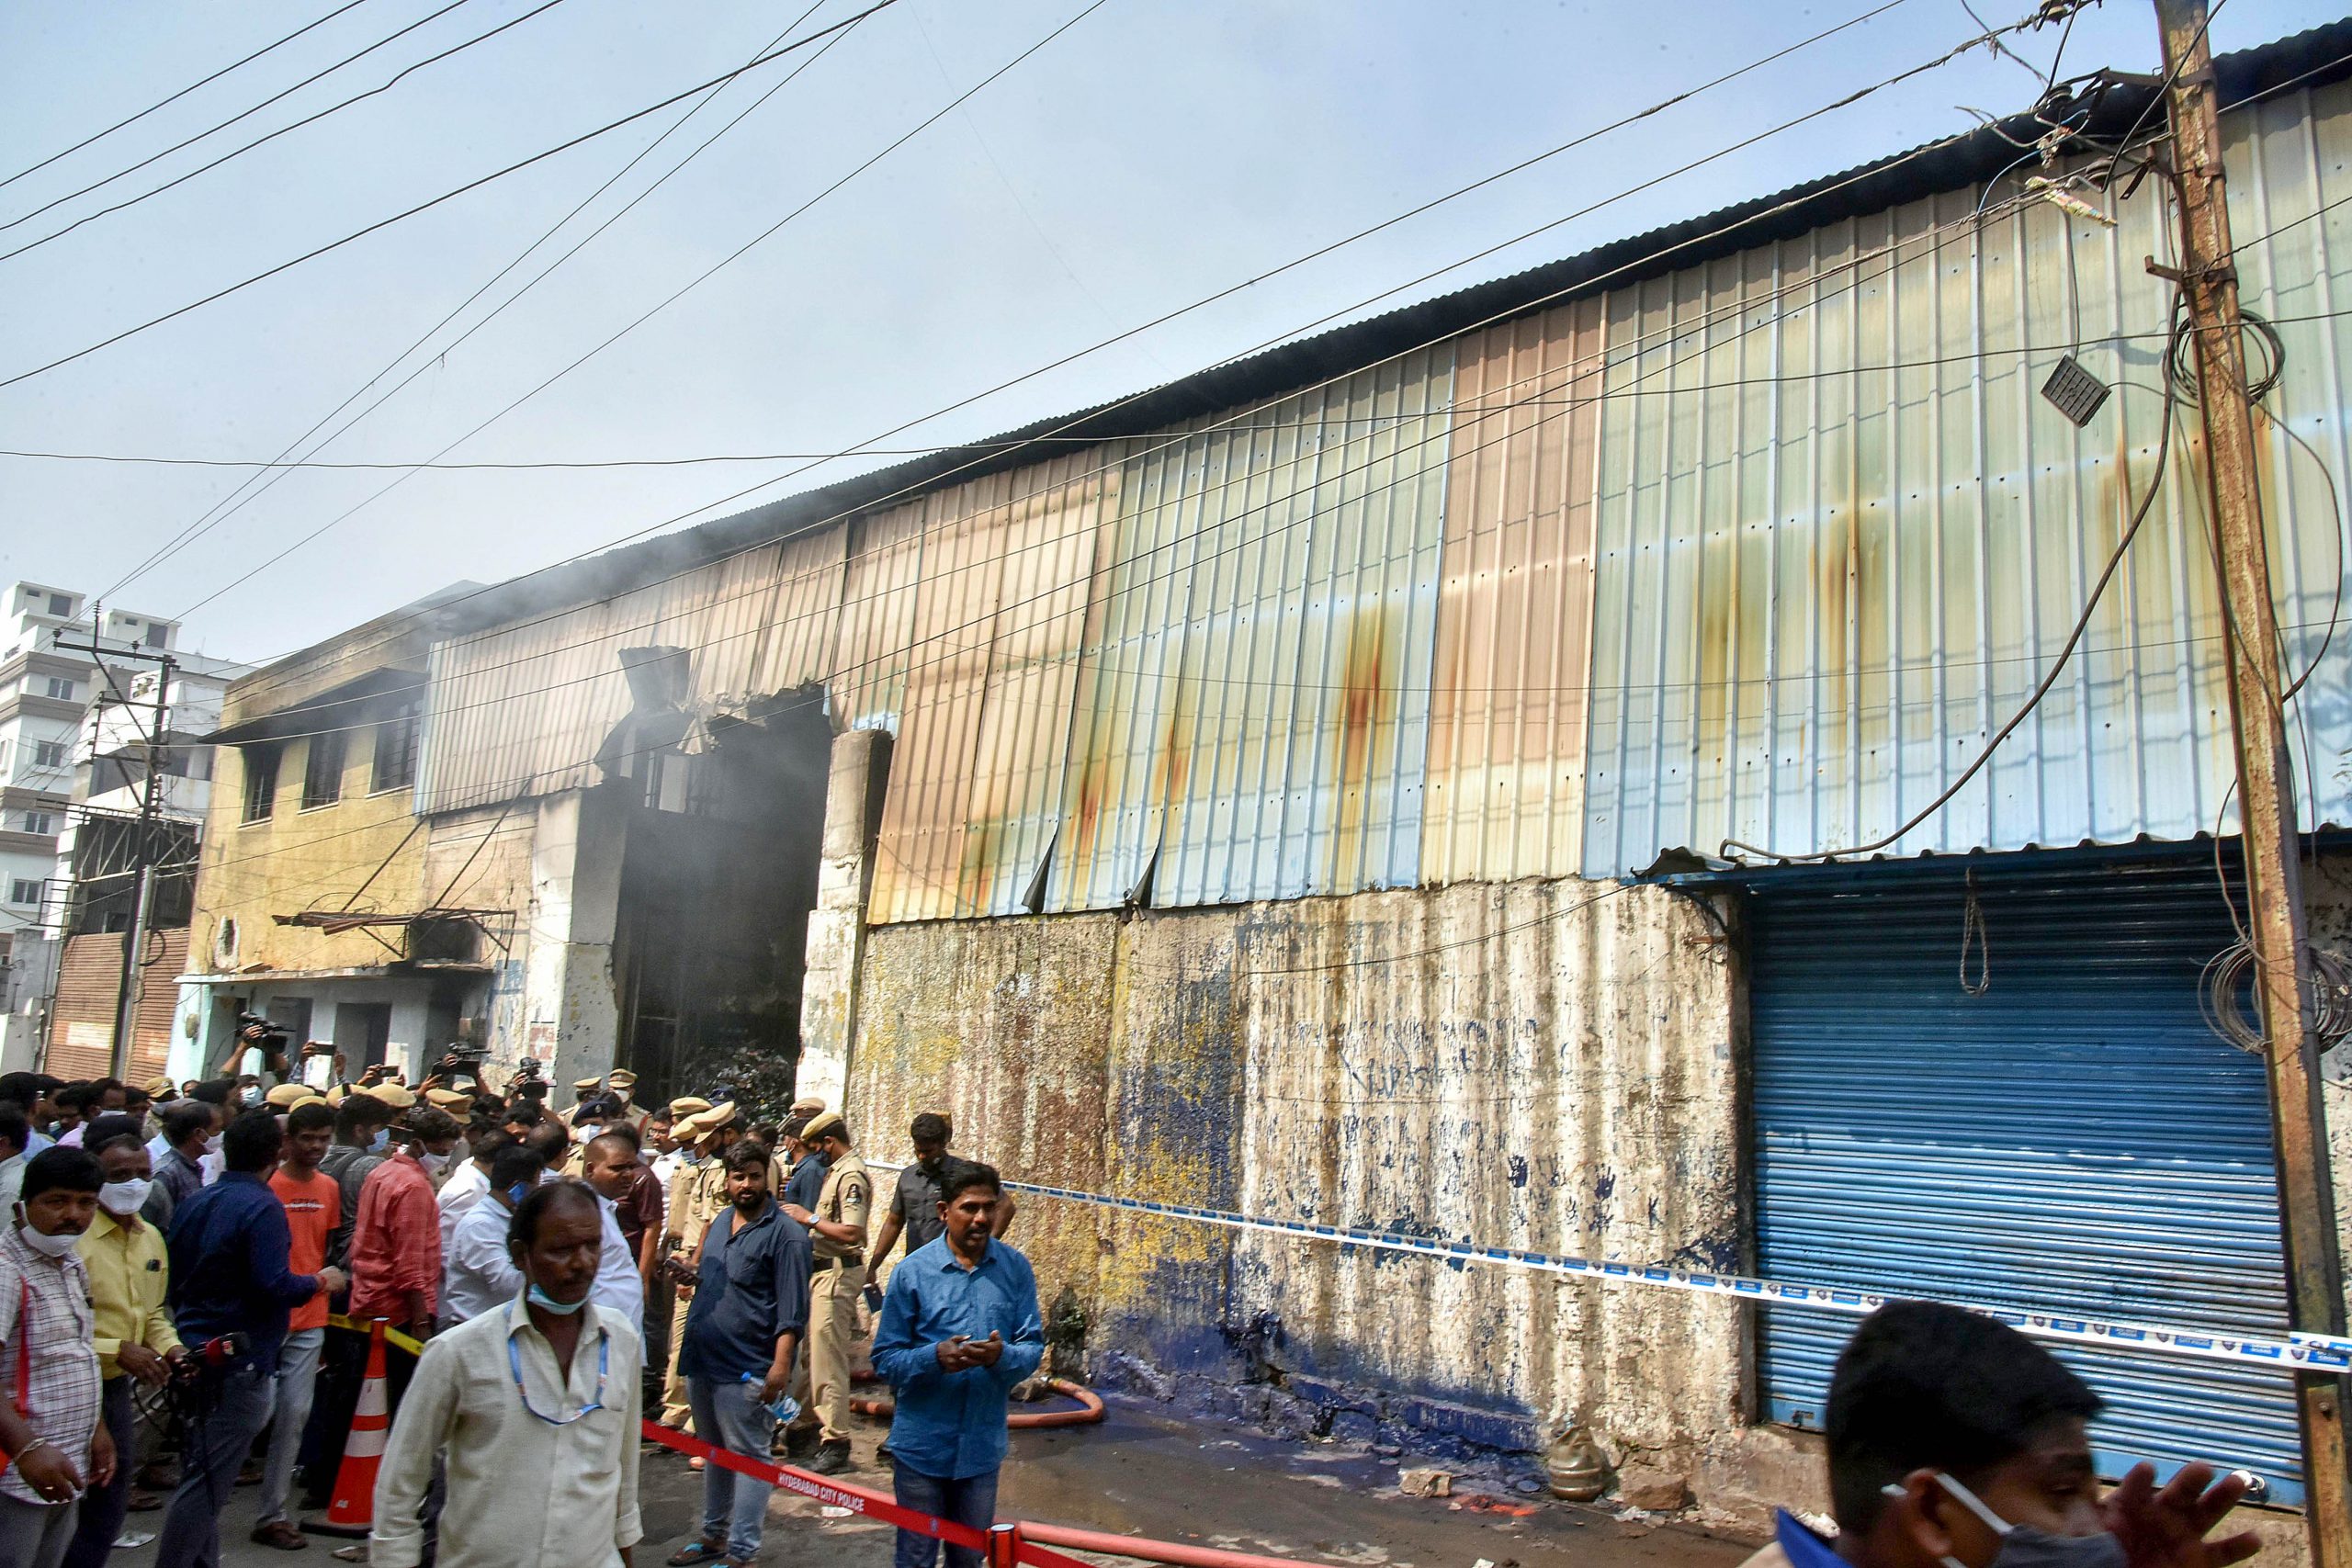 PM Modi announces Rs 2 lakh compensation for family of 11 killed in Hyderabad fire accident